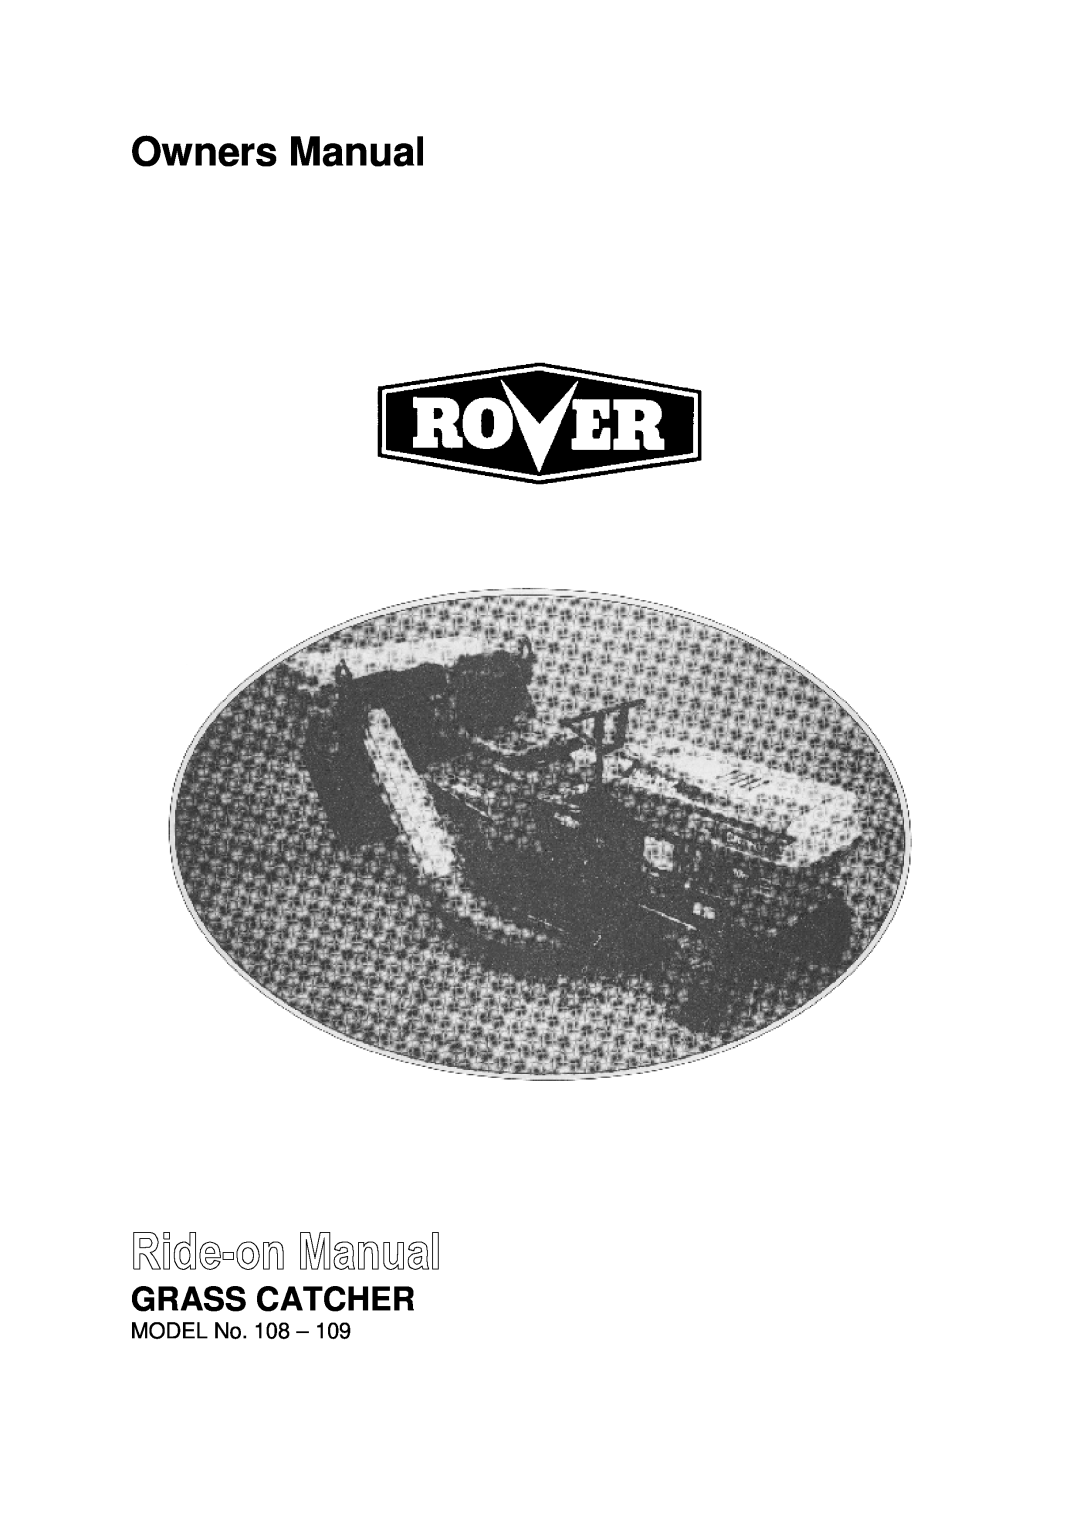 Rover 108, 109 owner manual Grass Catcher, MODEL No 